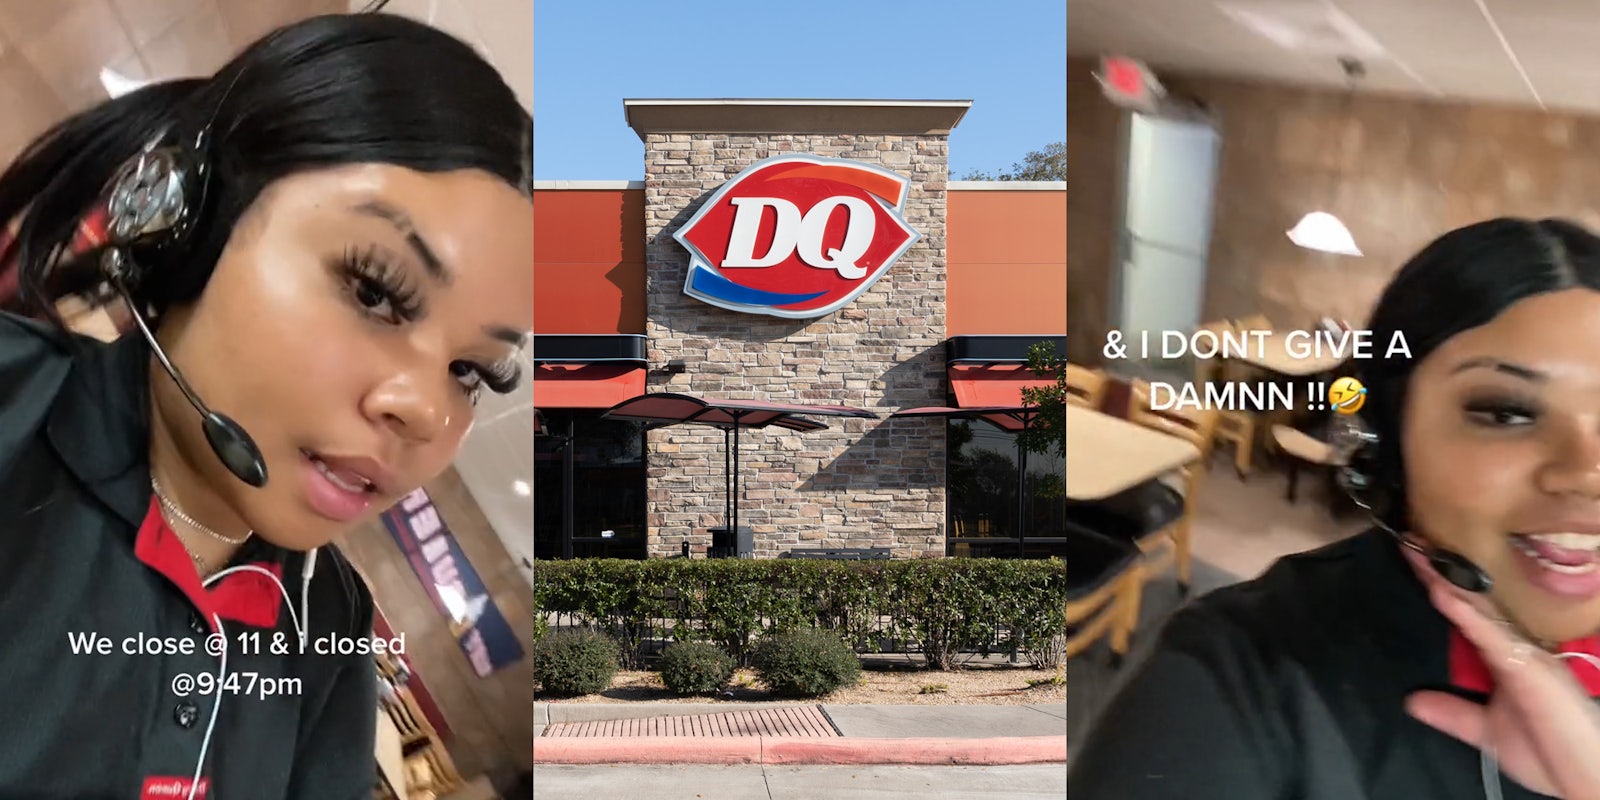 DQ employee with caption 'We close @ 11 & i closed @9:47pm' (l) Dairy Queen restaurant with sign (c) DQ employee speaking caption '& I DONT GIVE A DAMN' (r)